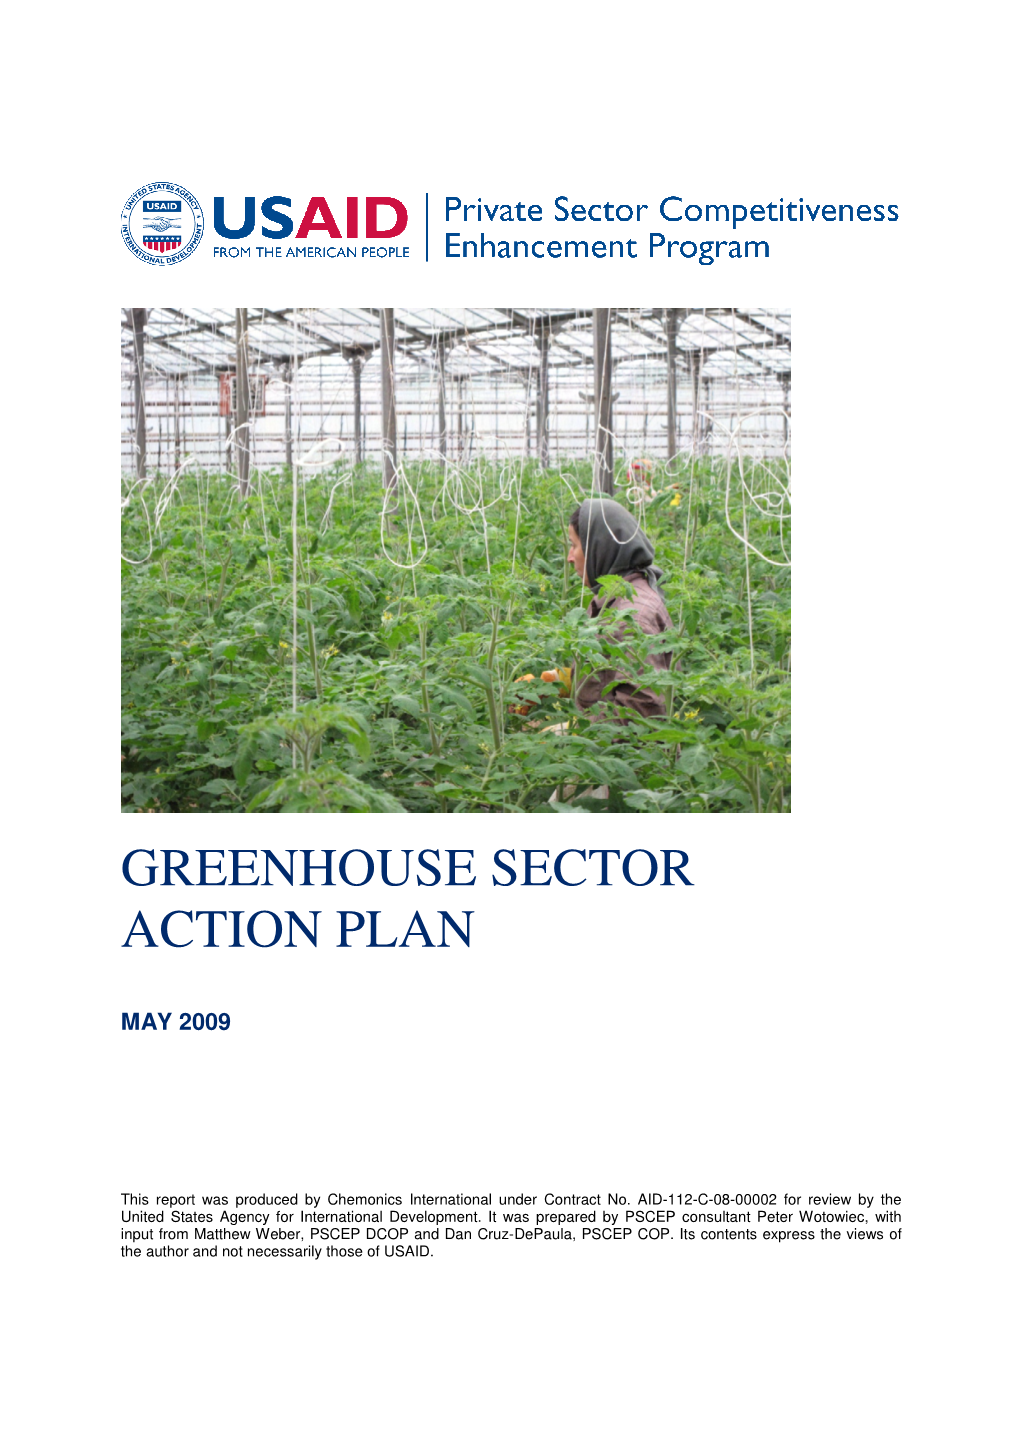 Greenhouse Sector Action Plan